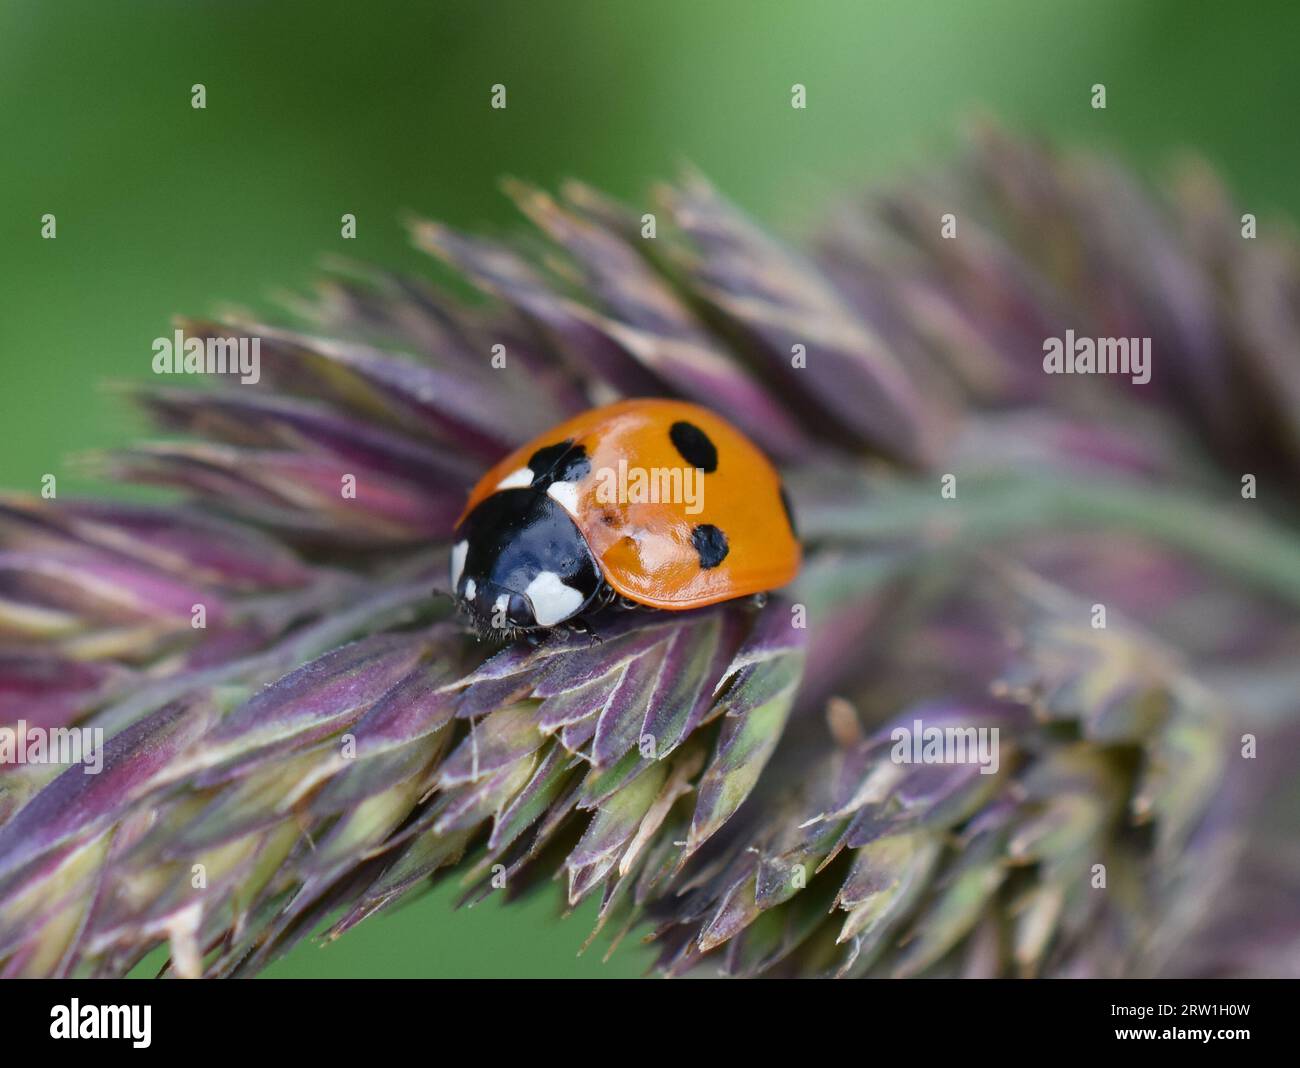 Sevenspotted ladybird coccinella septempunctata on a grass straw Stock Photo